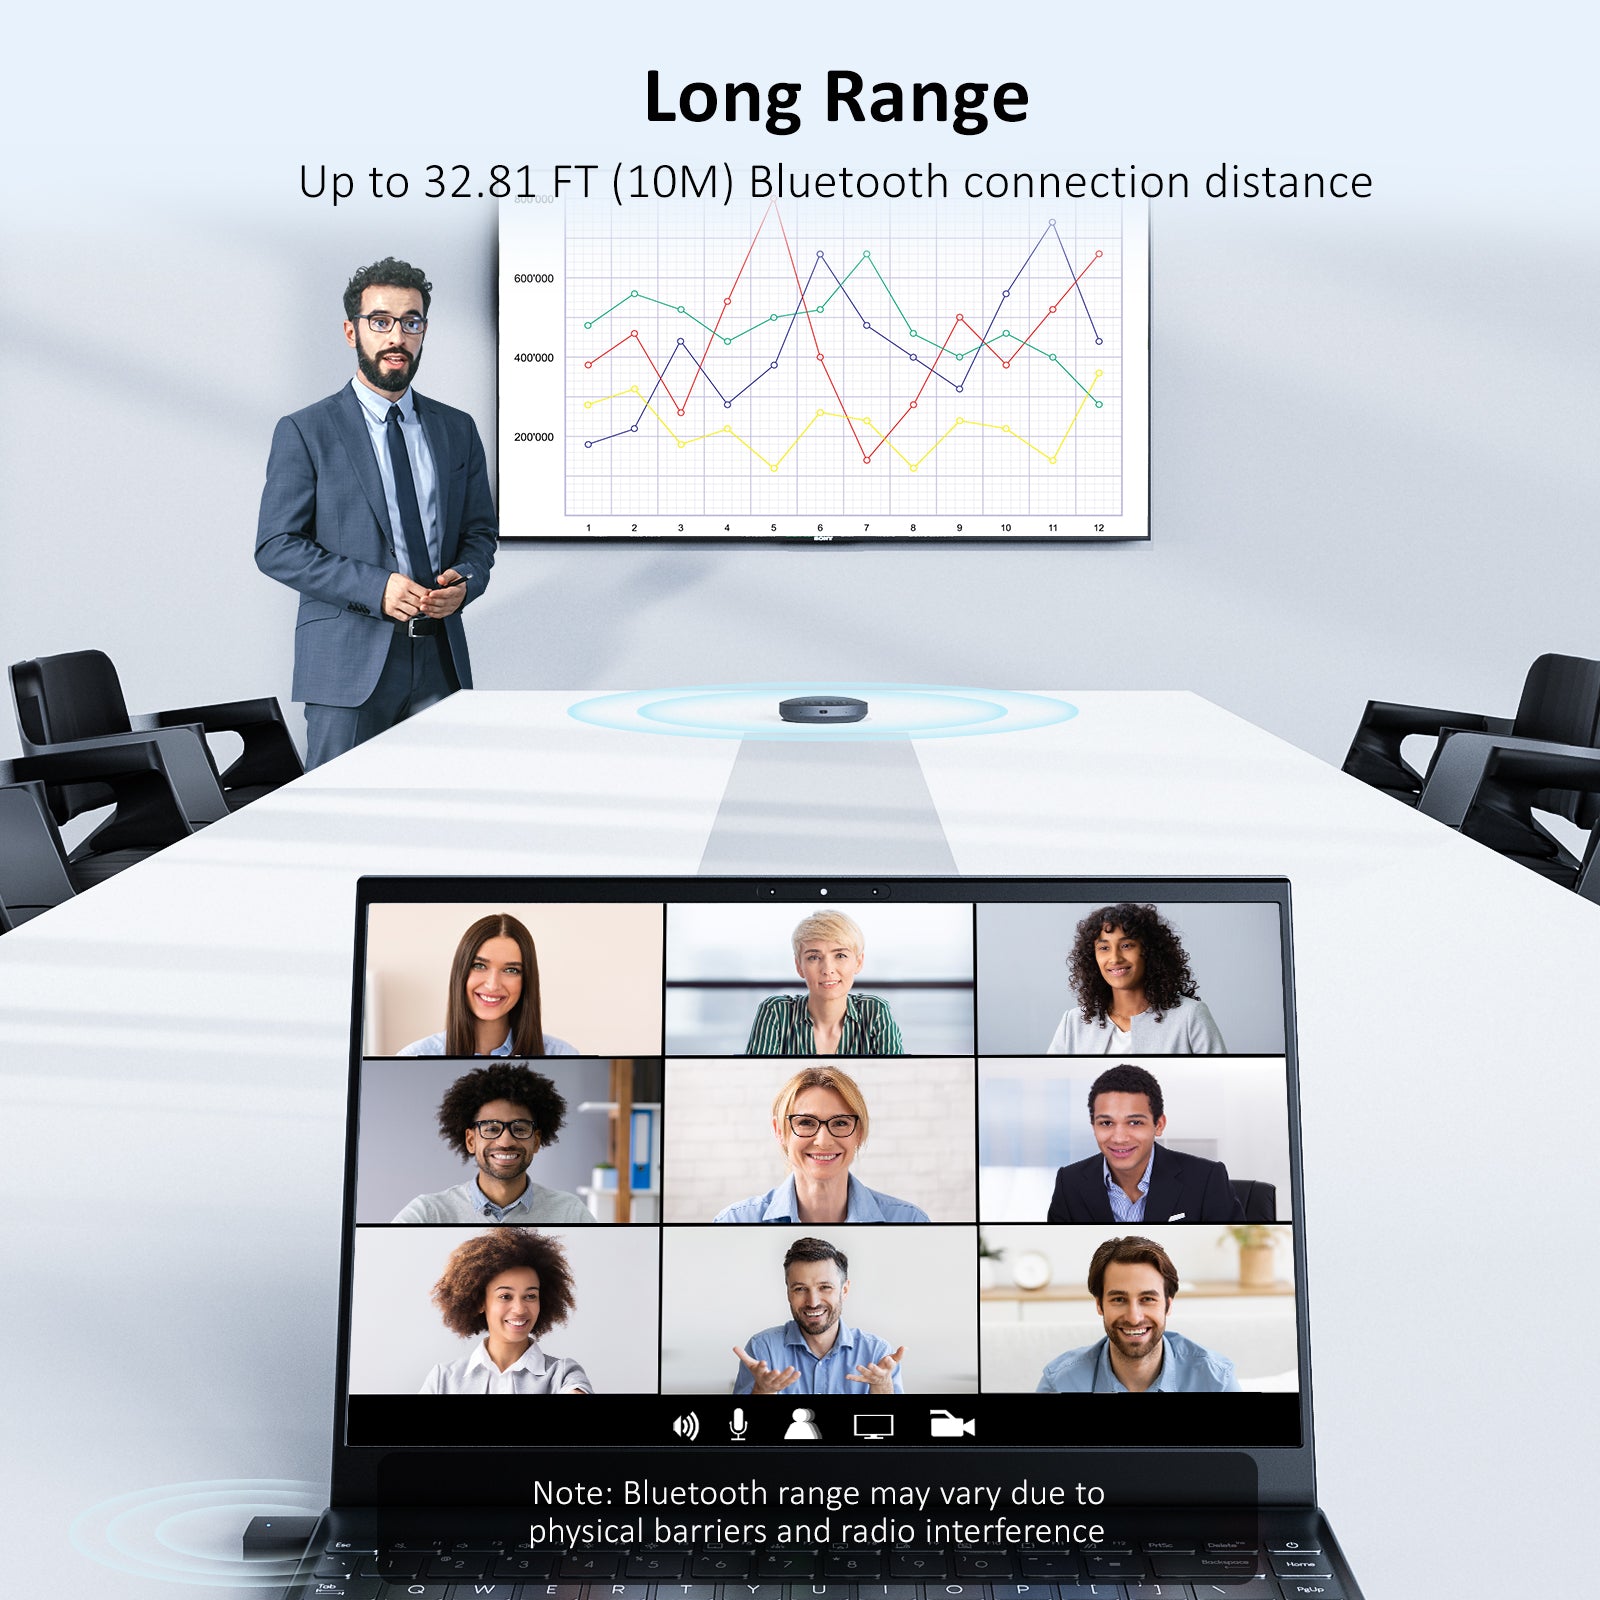 Experience Seamless Bluetooth Connection up to 32.81FT for Presentations and Meetings